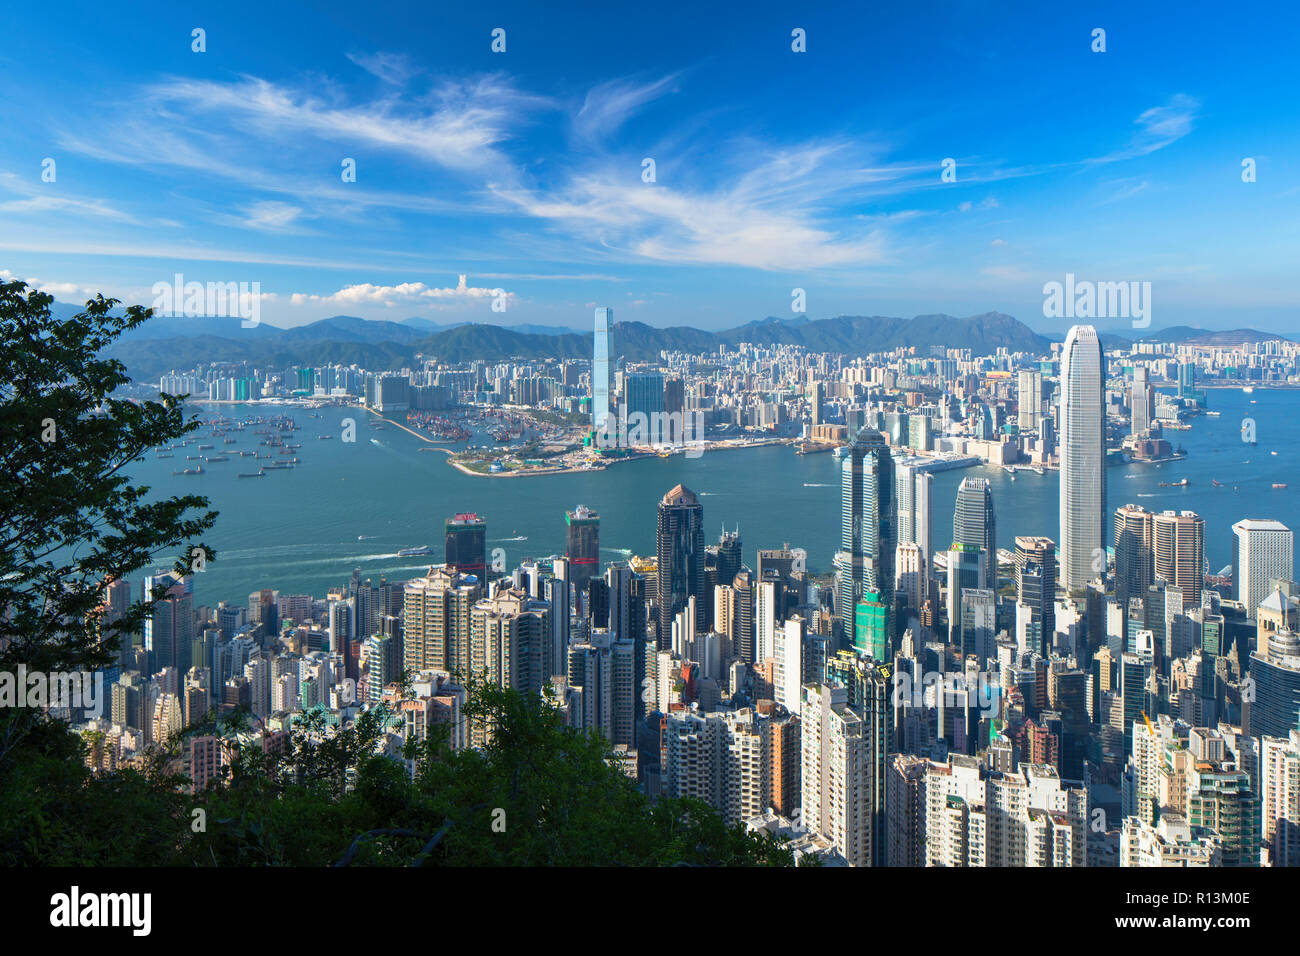 Skyline of Hong Kong Island and Kowloon from Victoria Peak, Hong Kong Island, Hong Kong Stock Photo